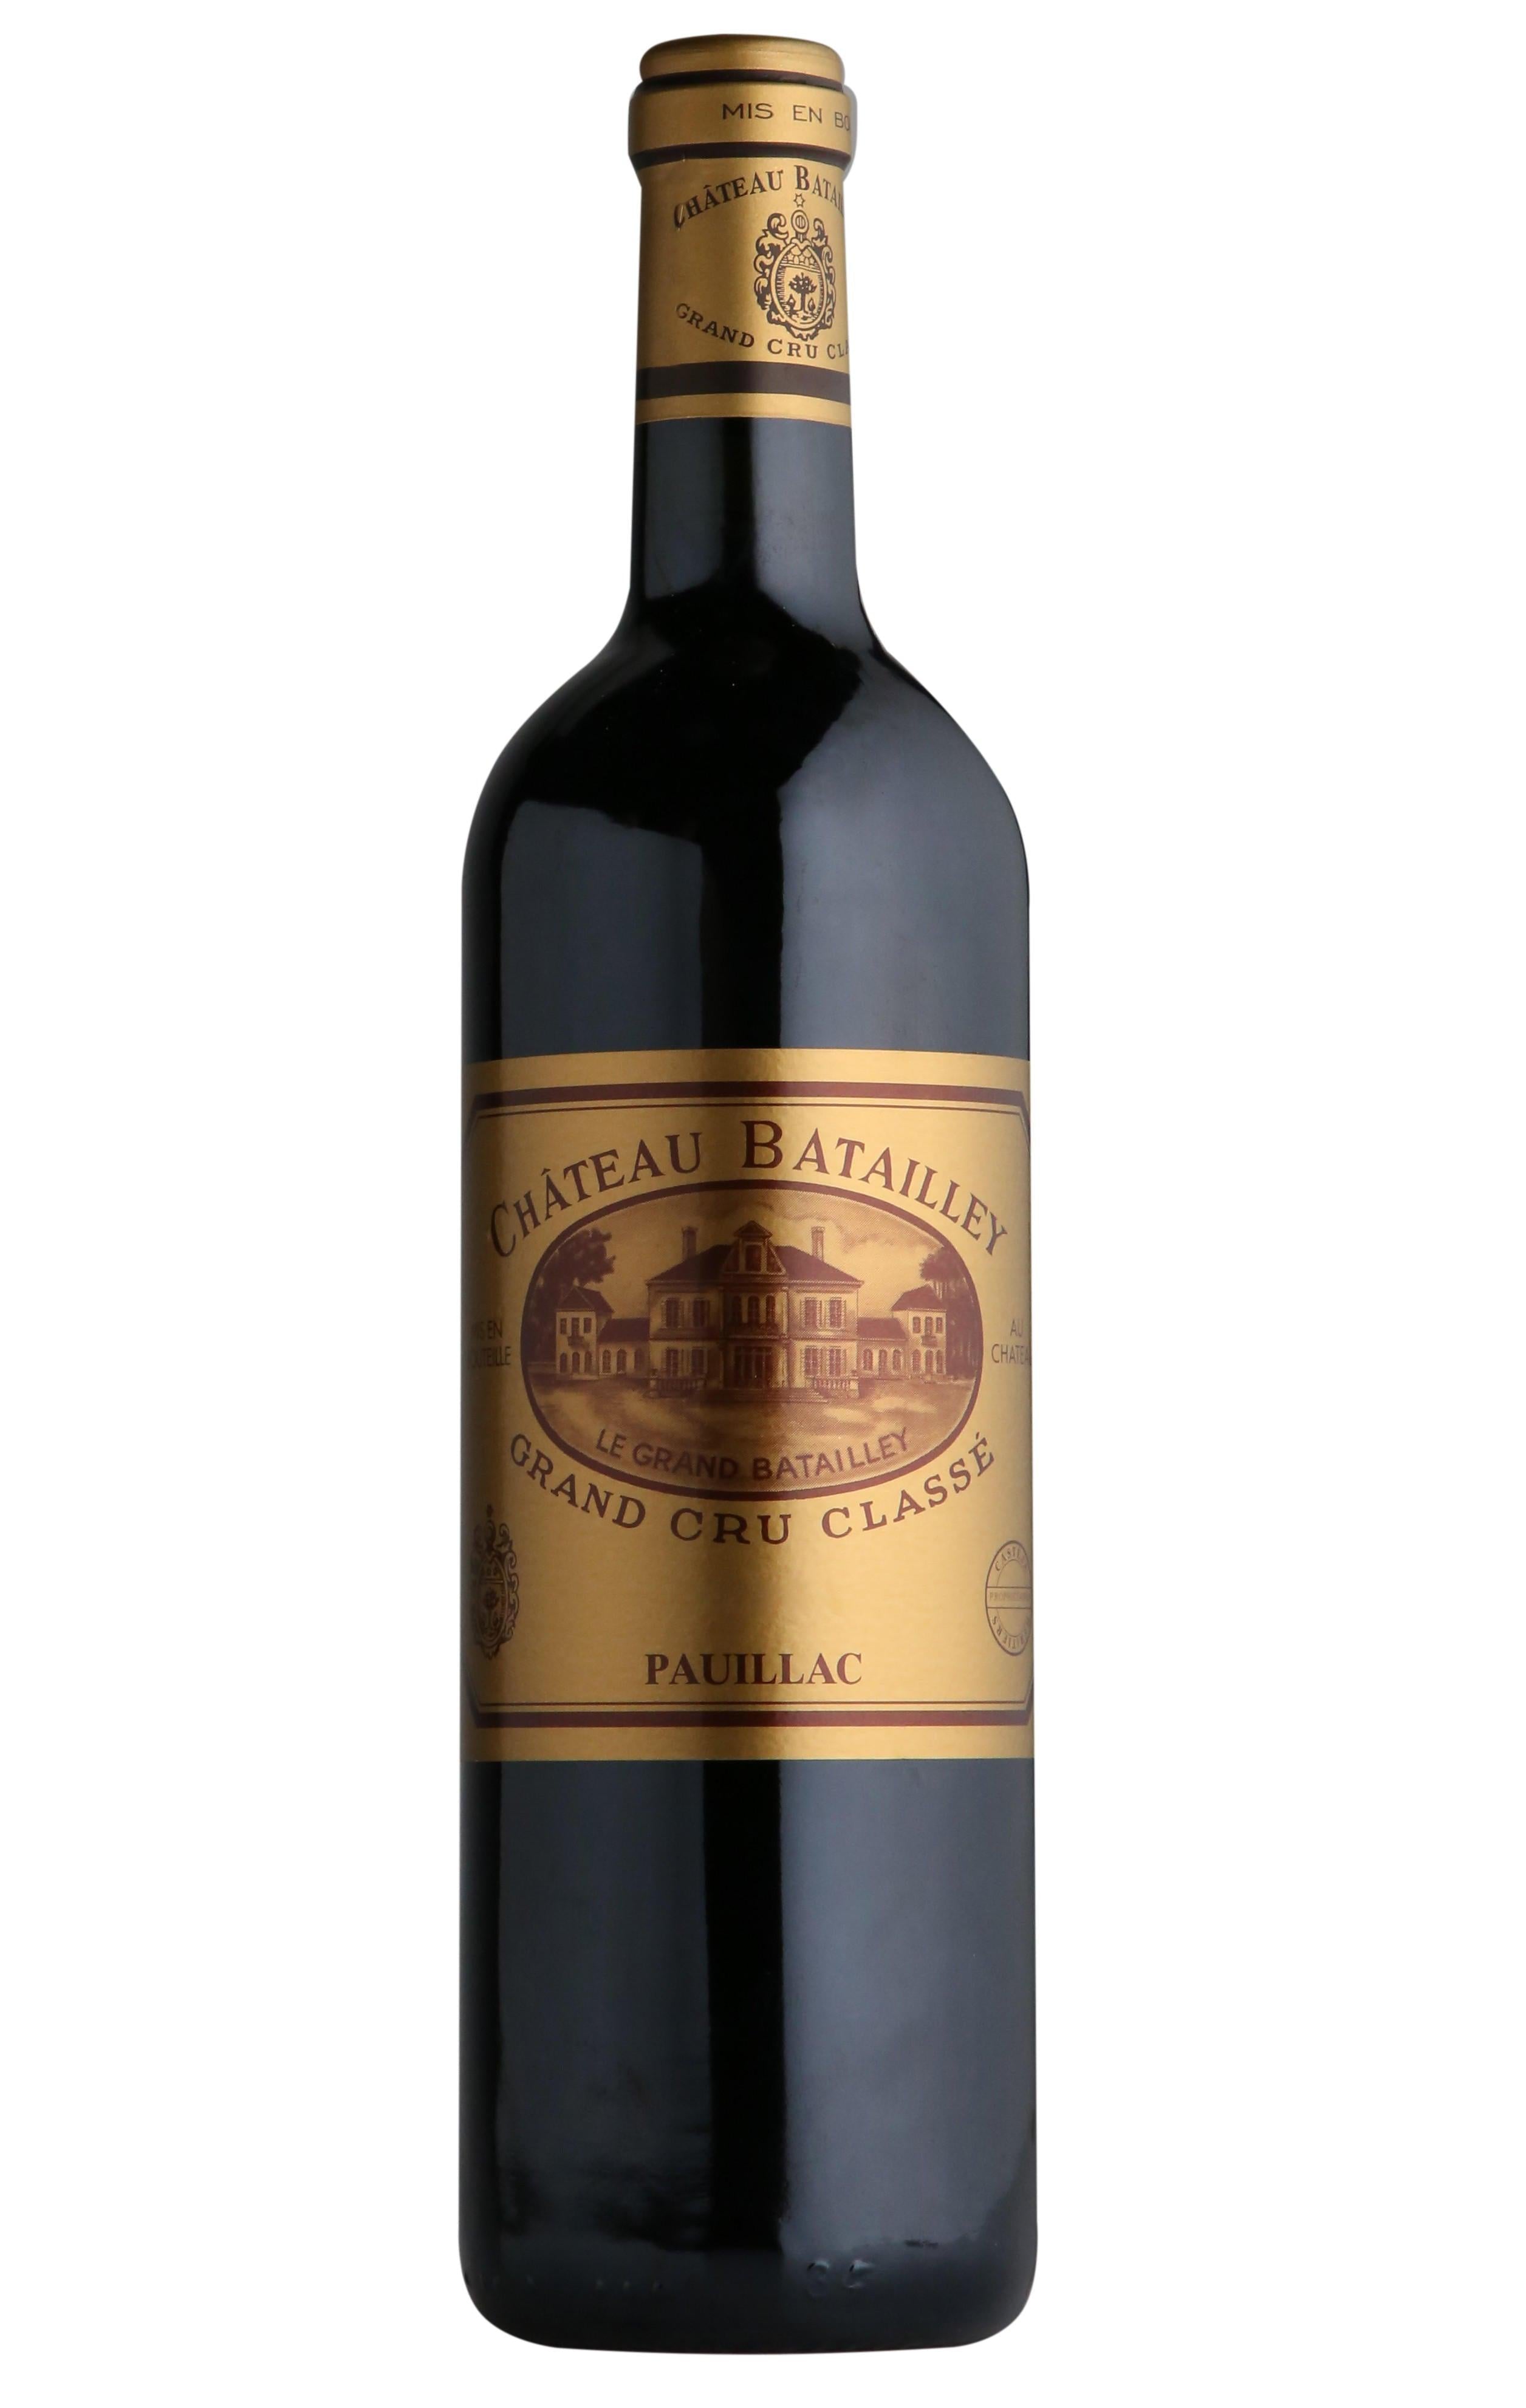 Château Batailley 2012 (WE89) - Double S Wine 